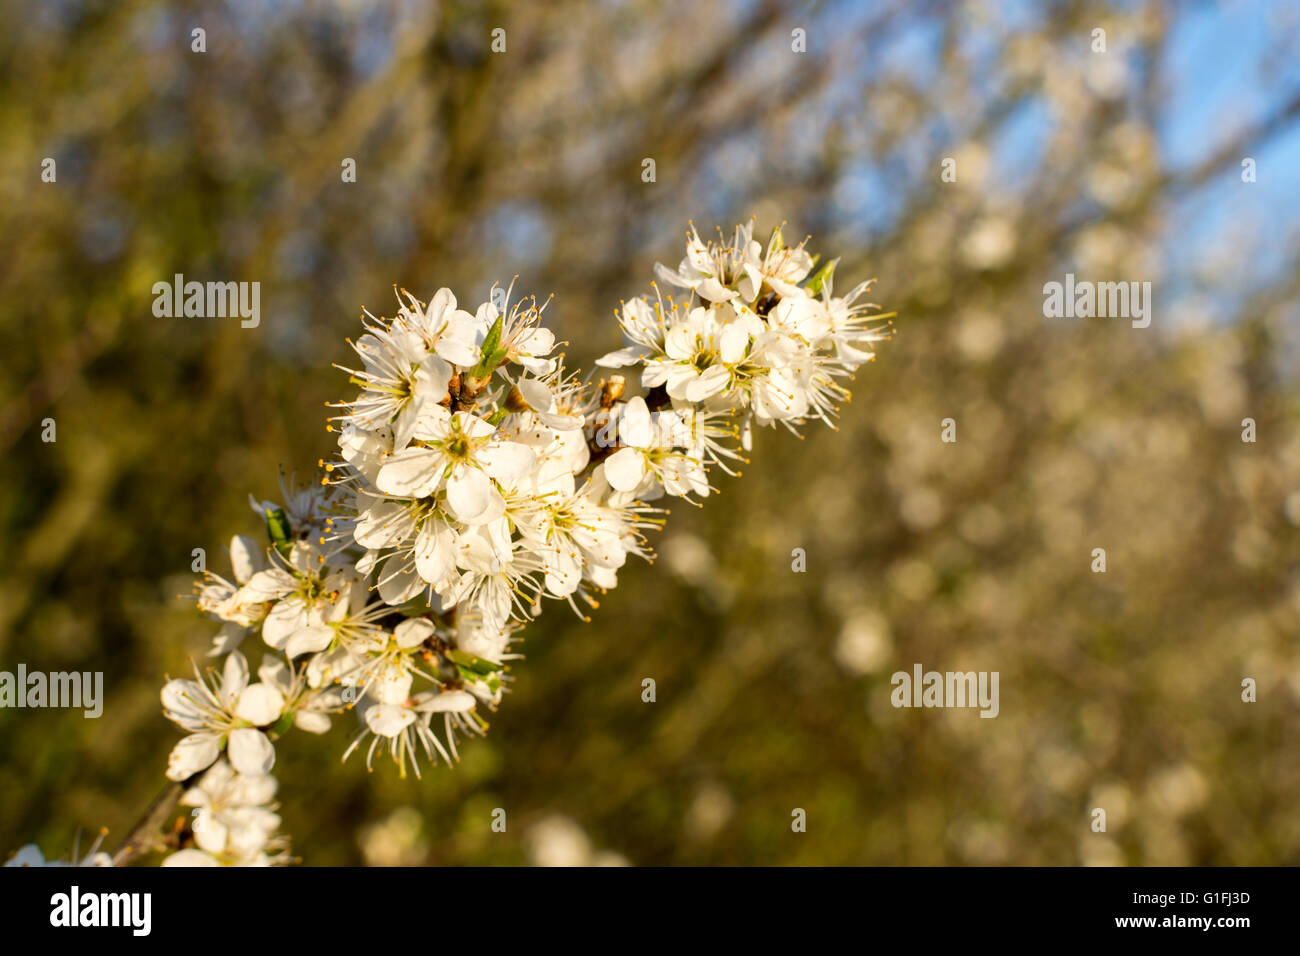 Common Hawthorn (Crataegus monogyna) tree in full blossom during early spring Stock Photo